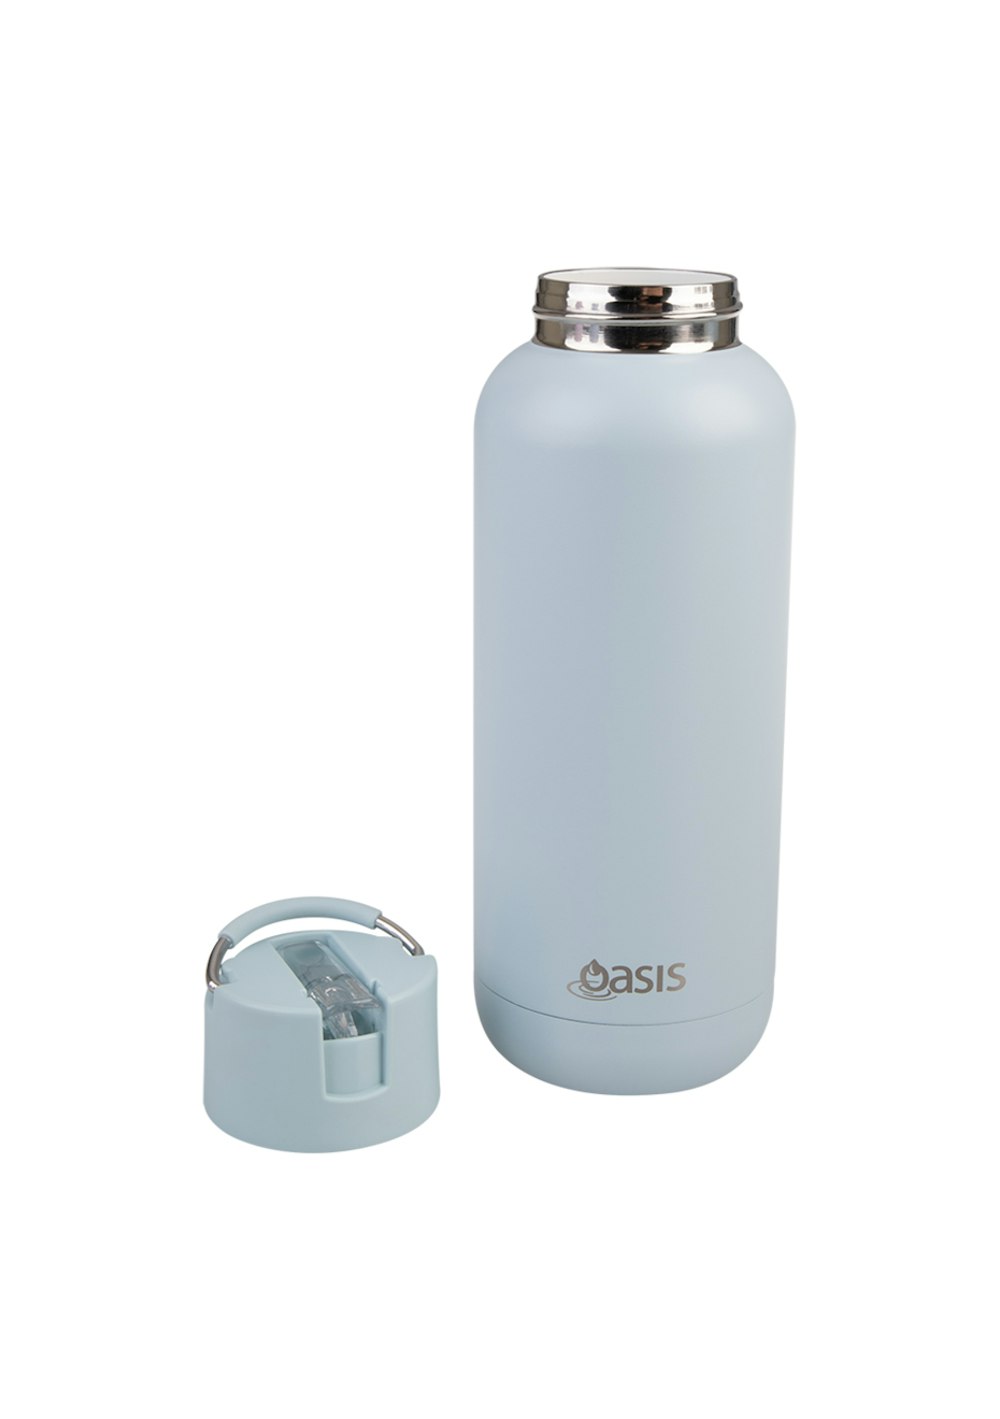 Oasis Stainless Steel Ceramic Moda Triple Wall Insulated Drink Bottle ...